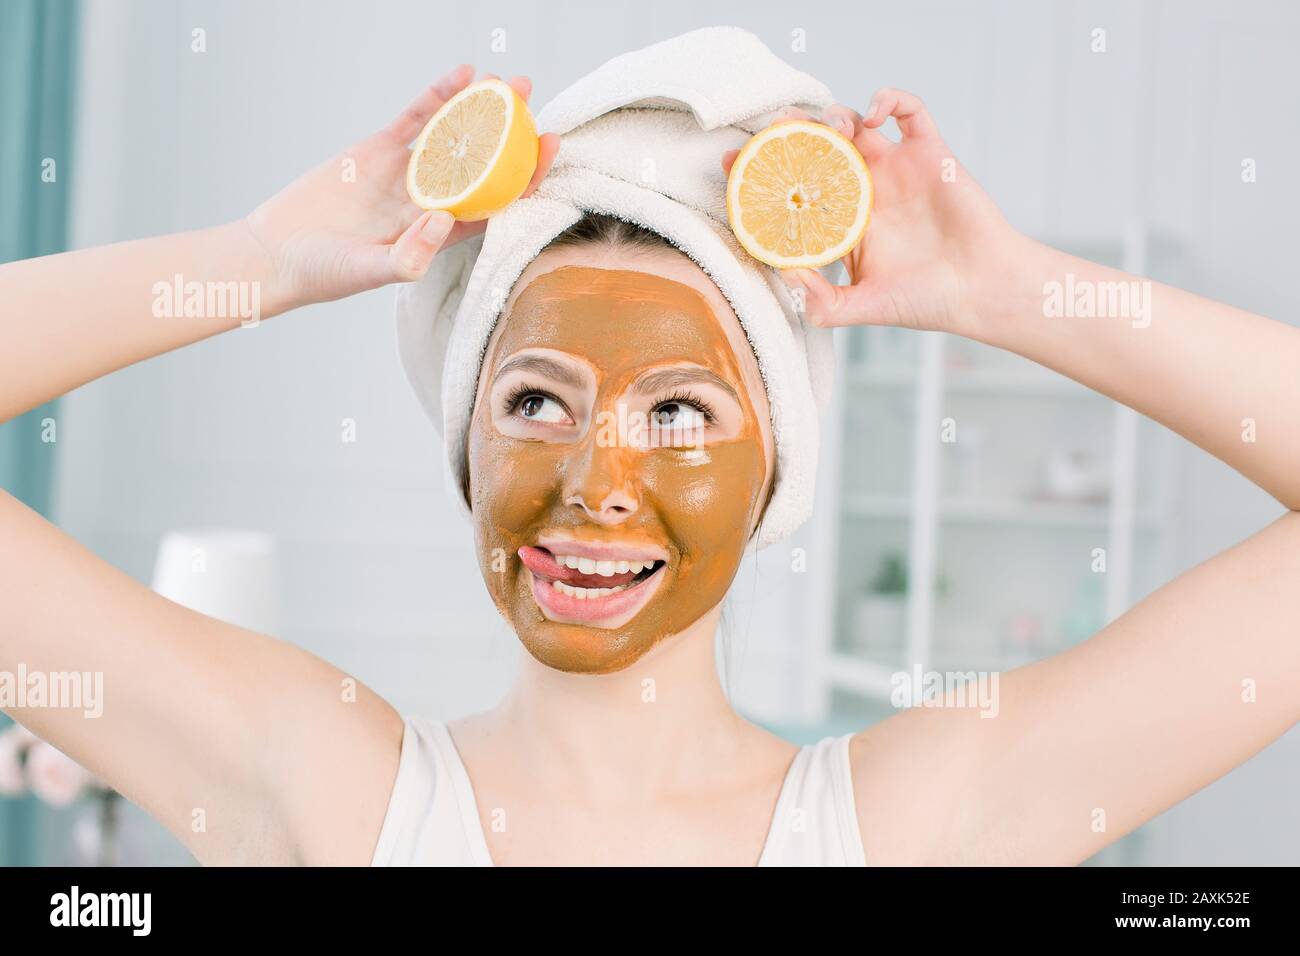 beautiful Caucasian woman in white towel with brown clay mask on her face and lemon slices, showing tongue and kiss face, beauty treatments concept Stock Photo